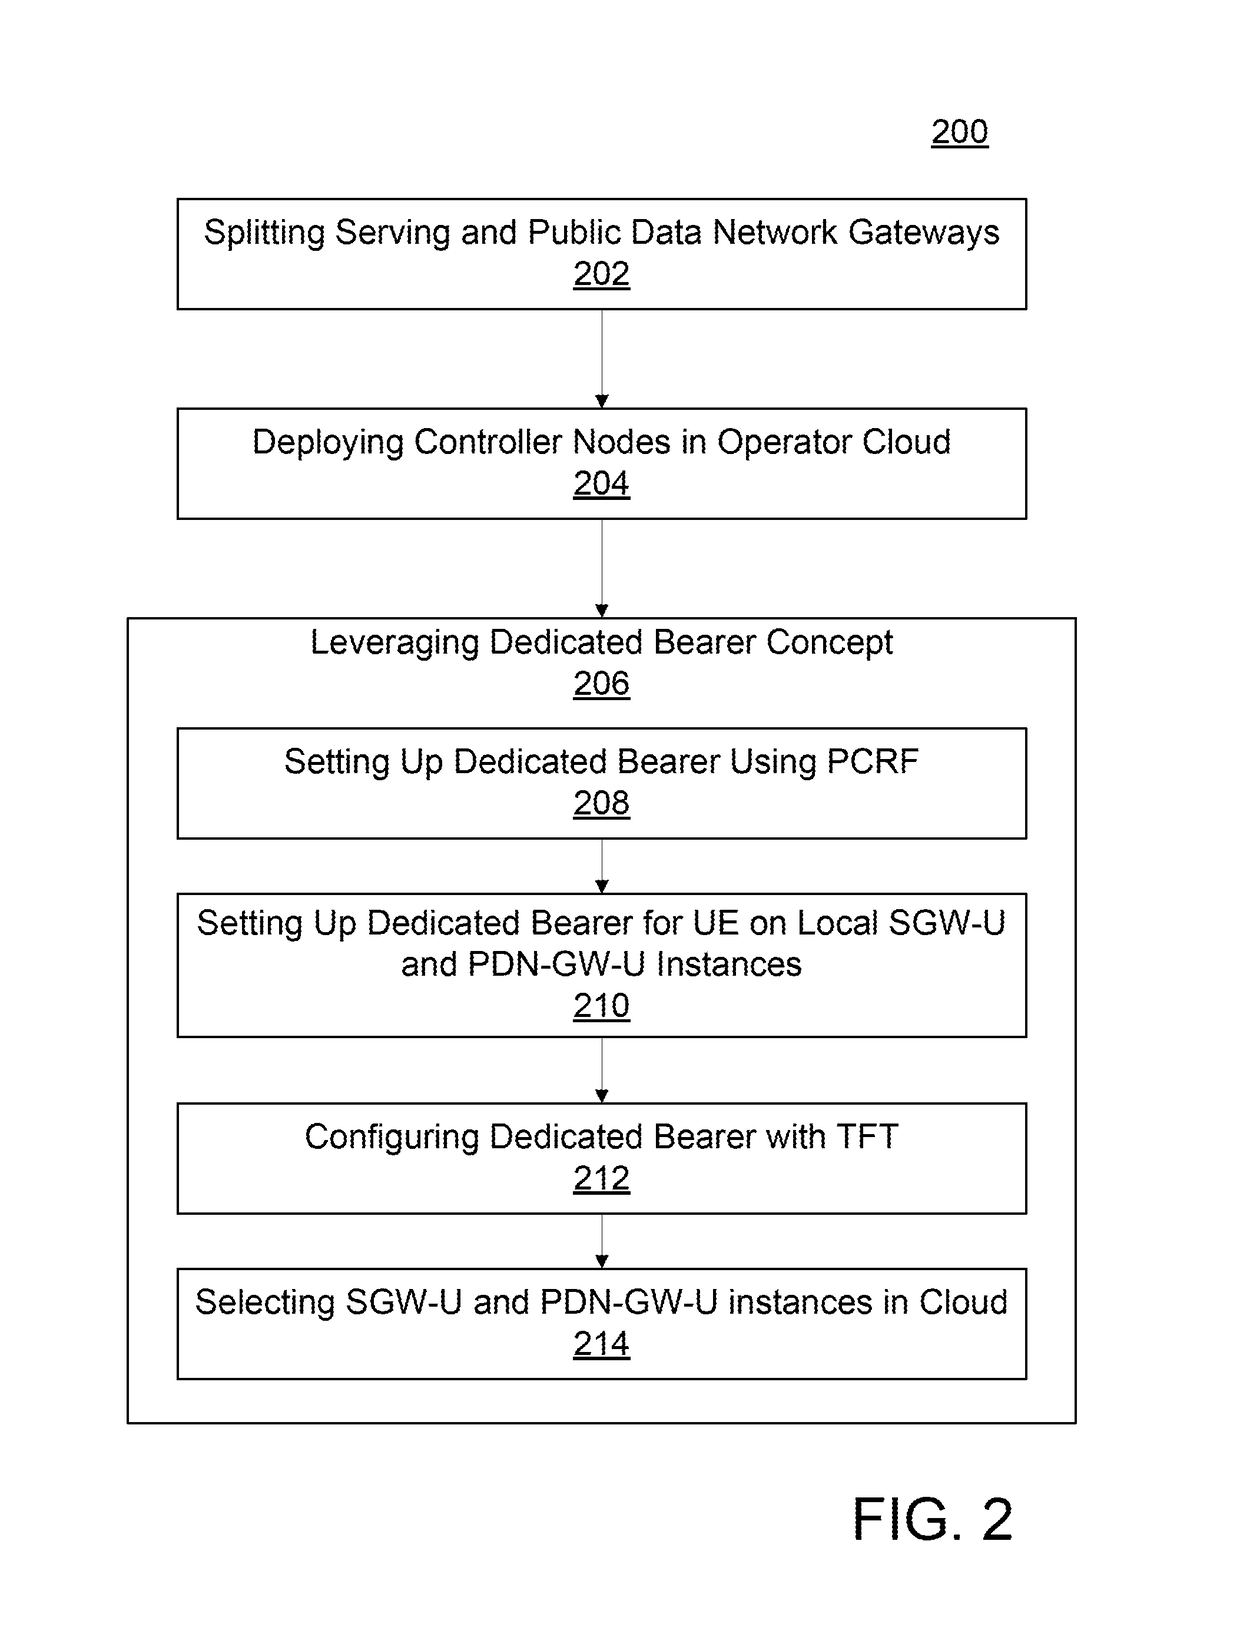 Enabling high-bandwidth, responsive mobile applications in LTE networks